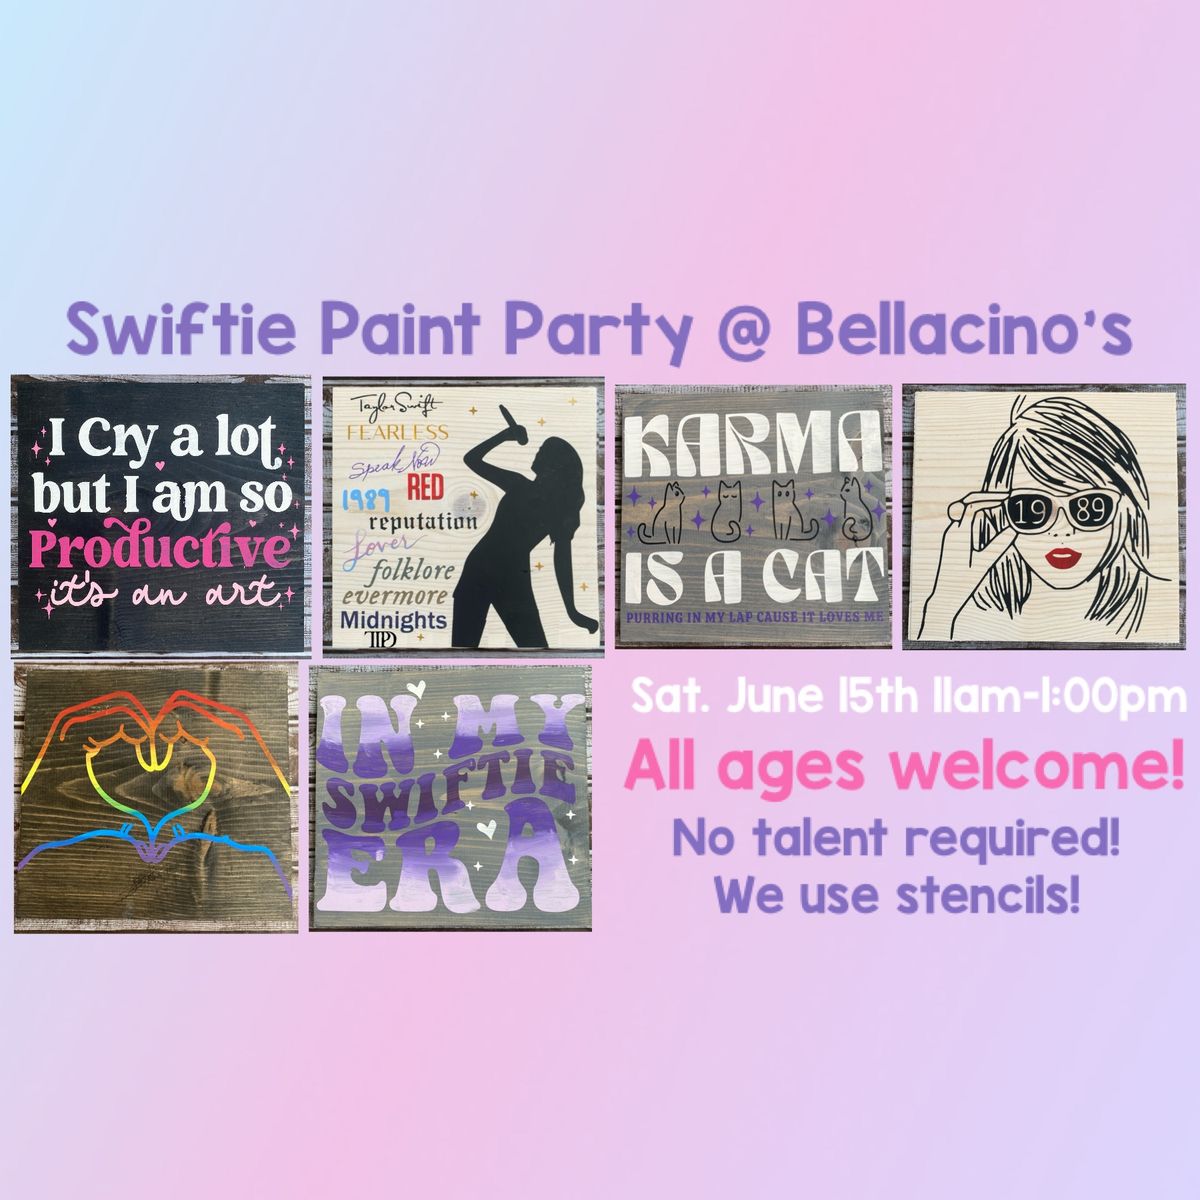 Swiftie Paint Party at Bellacino's